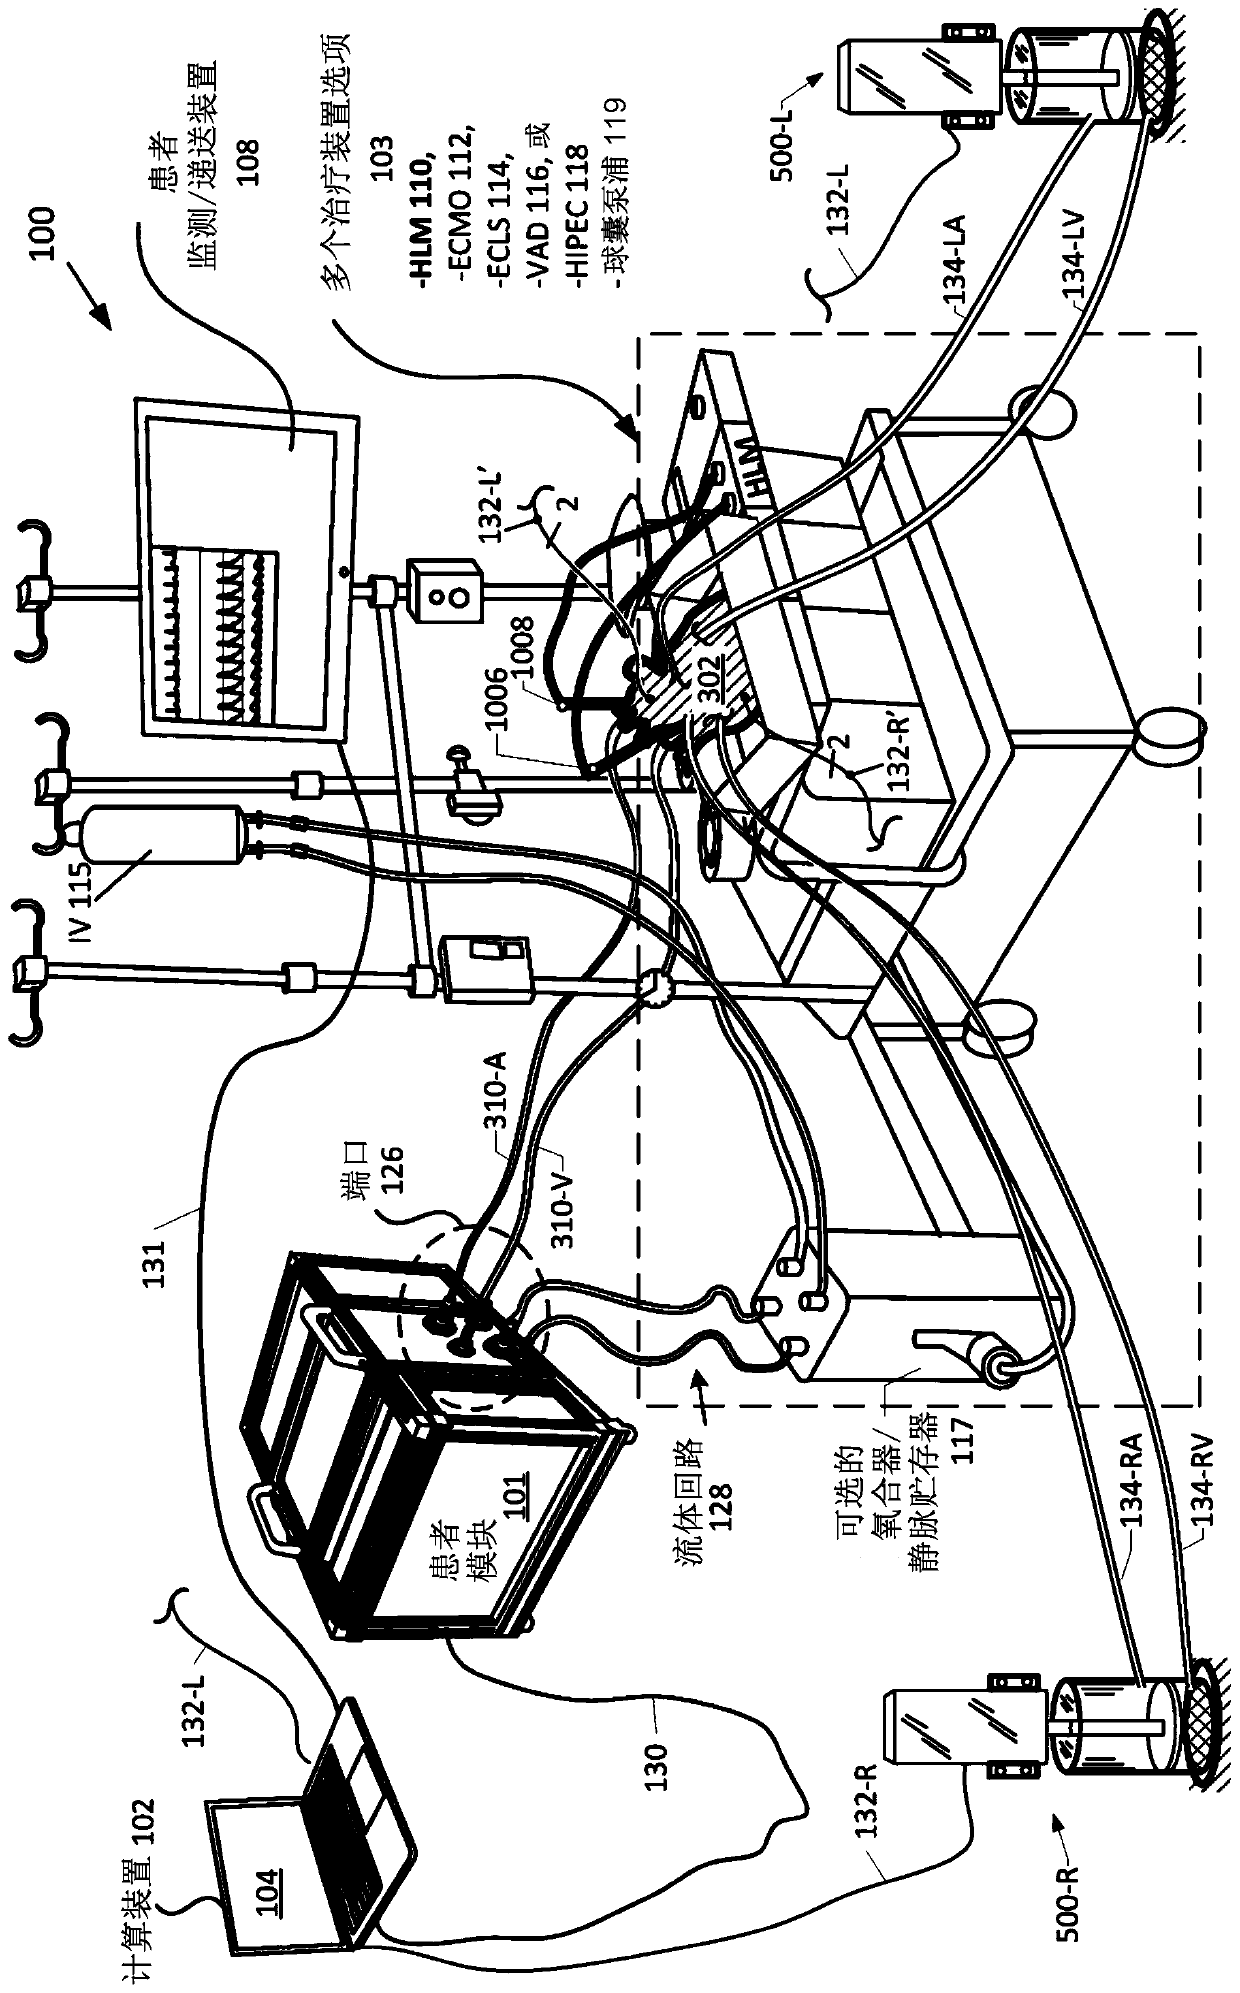 Heart simulation system for medical services or diagnostic machines